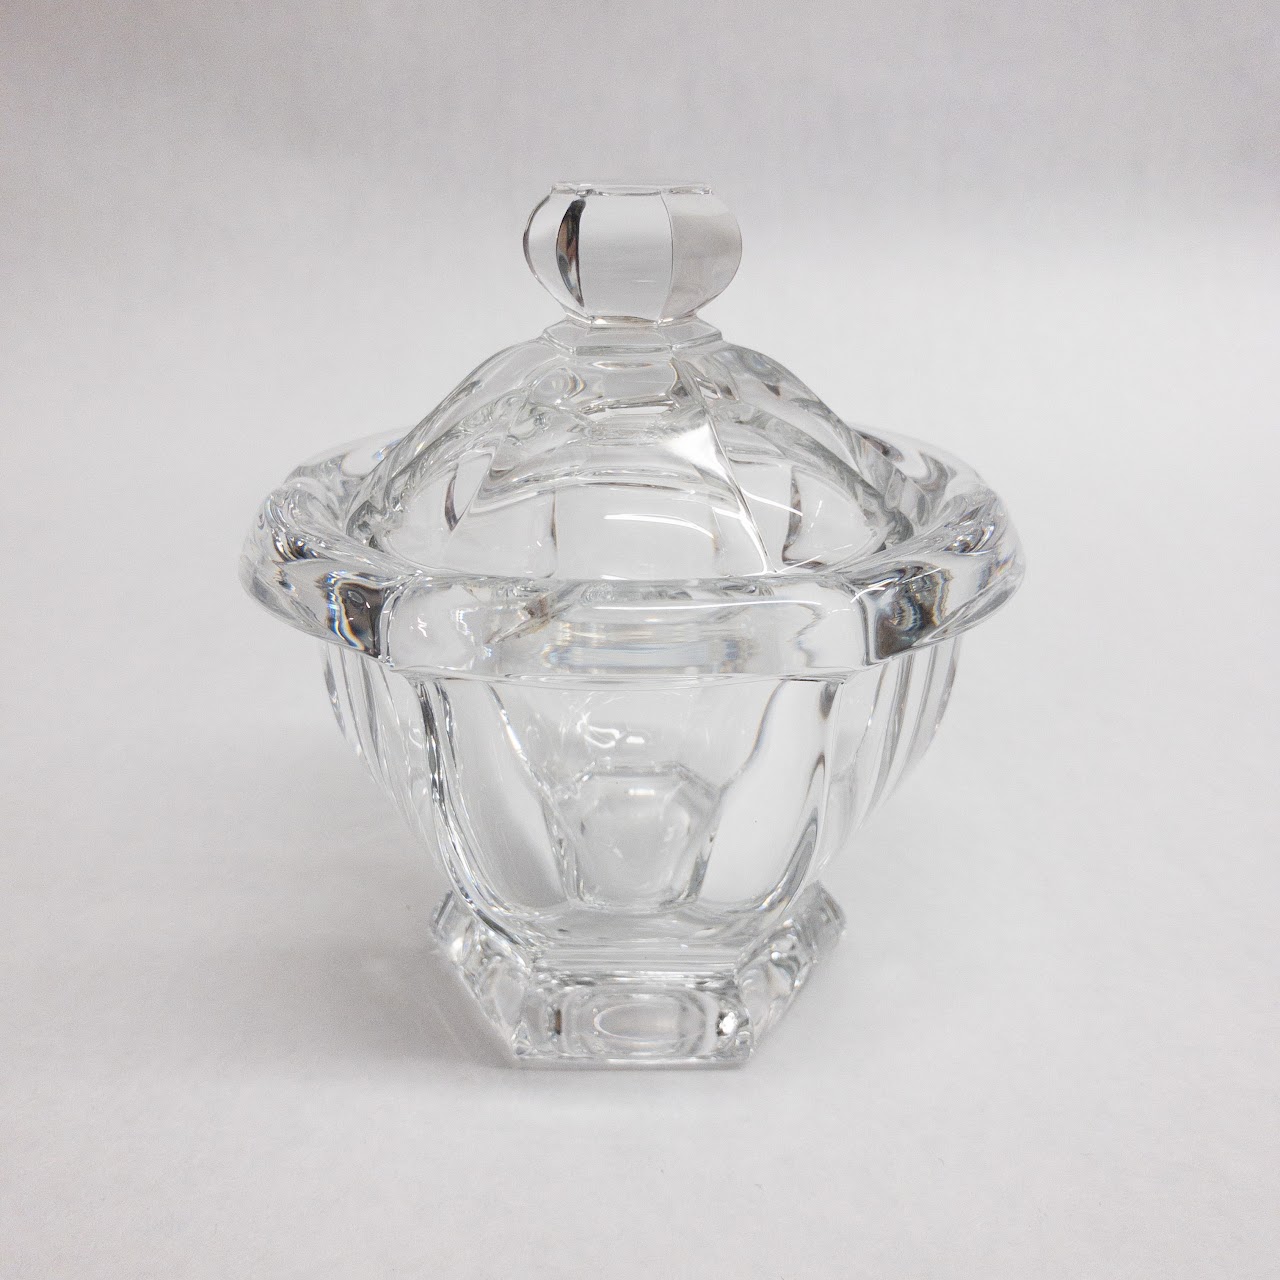 Baccarat Crystal Lidded Candy/Nut Dish